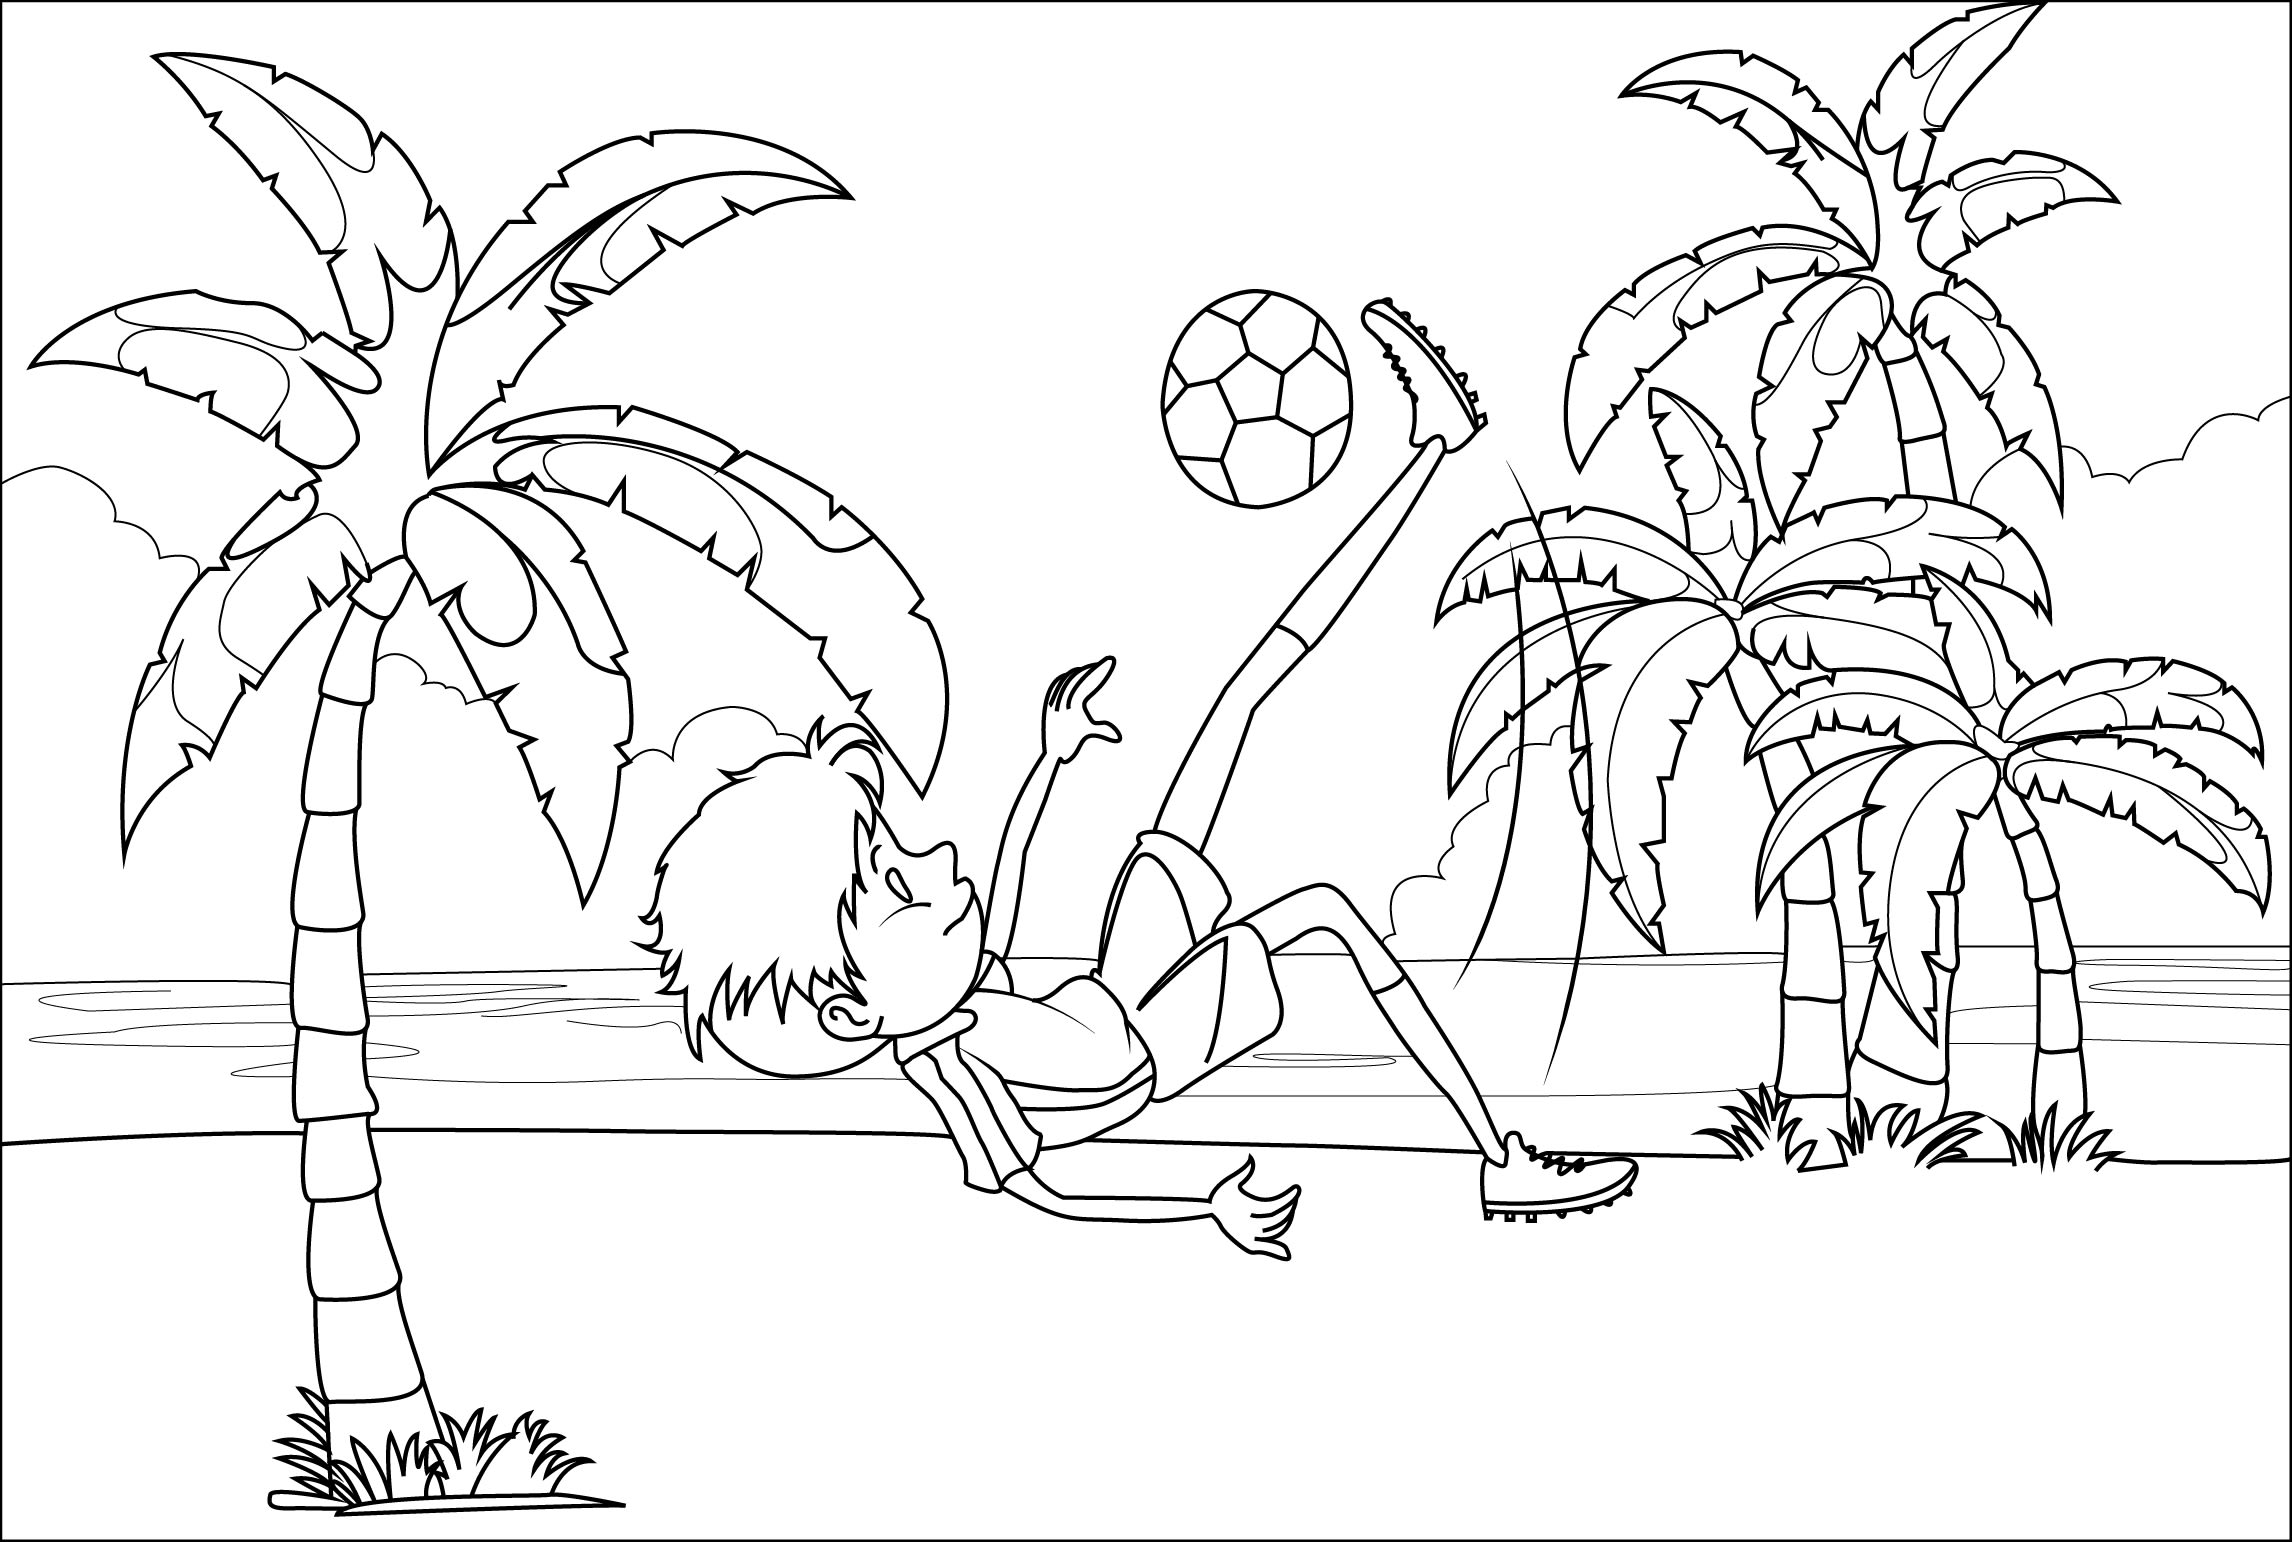 Rahadmolla: I will draw line art coloring book page for children for $5 on  fiverr.com